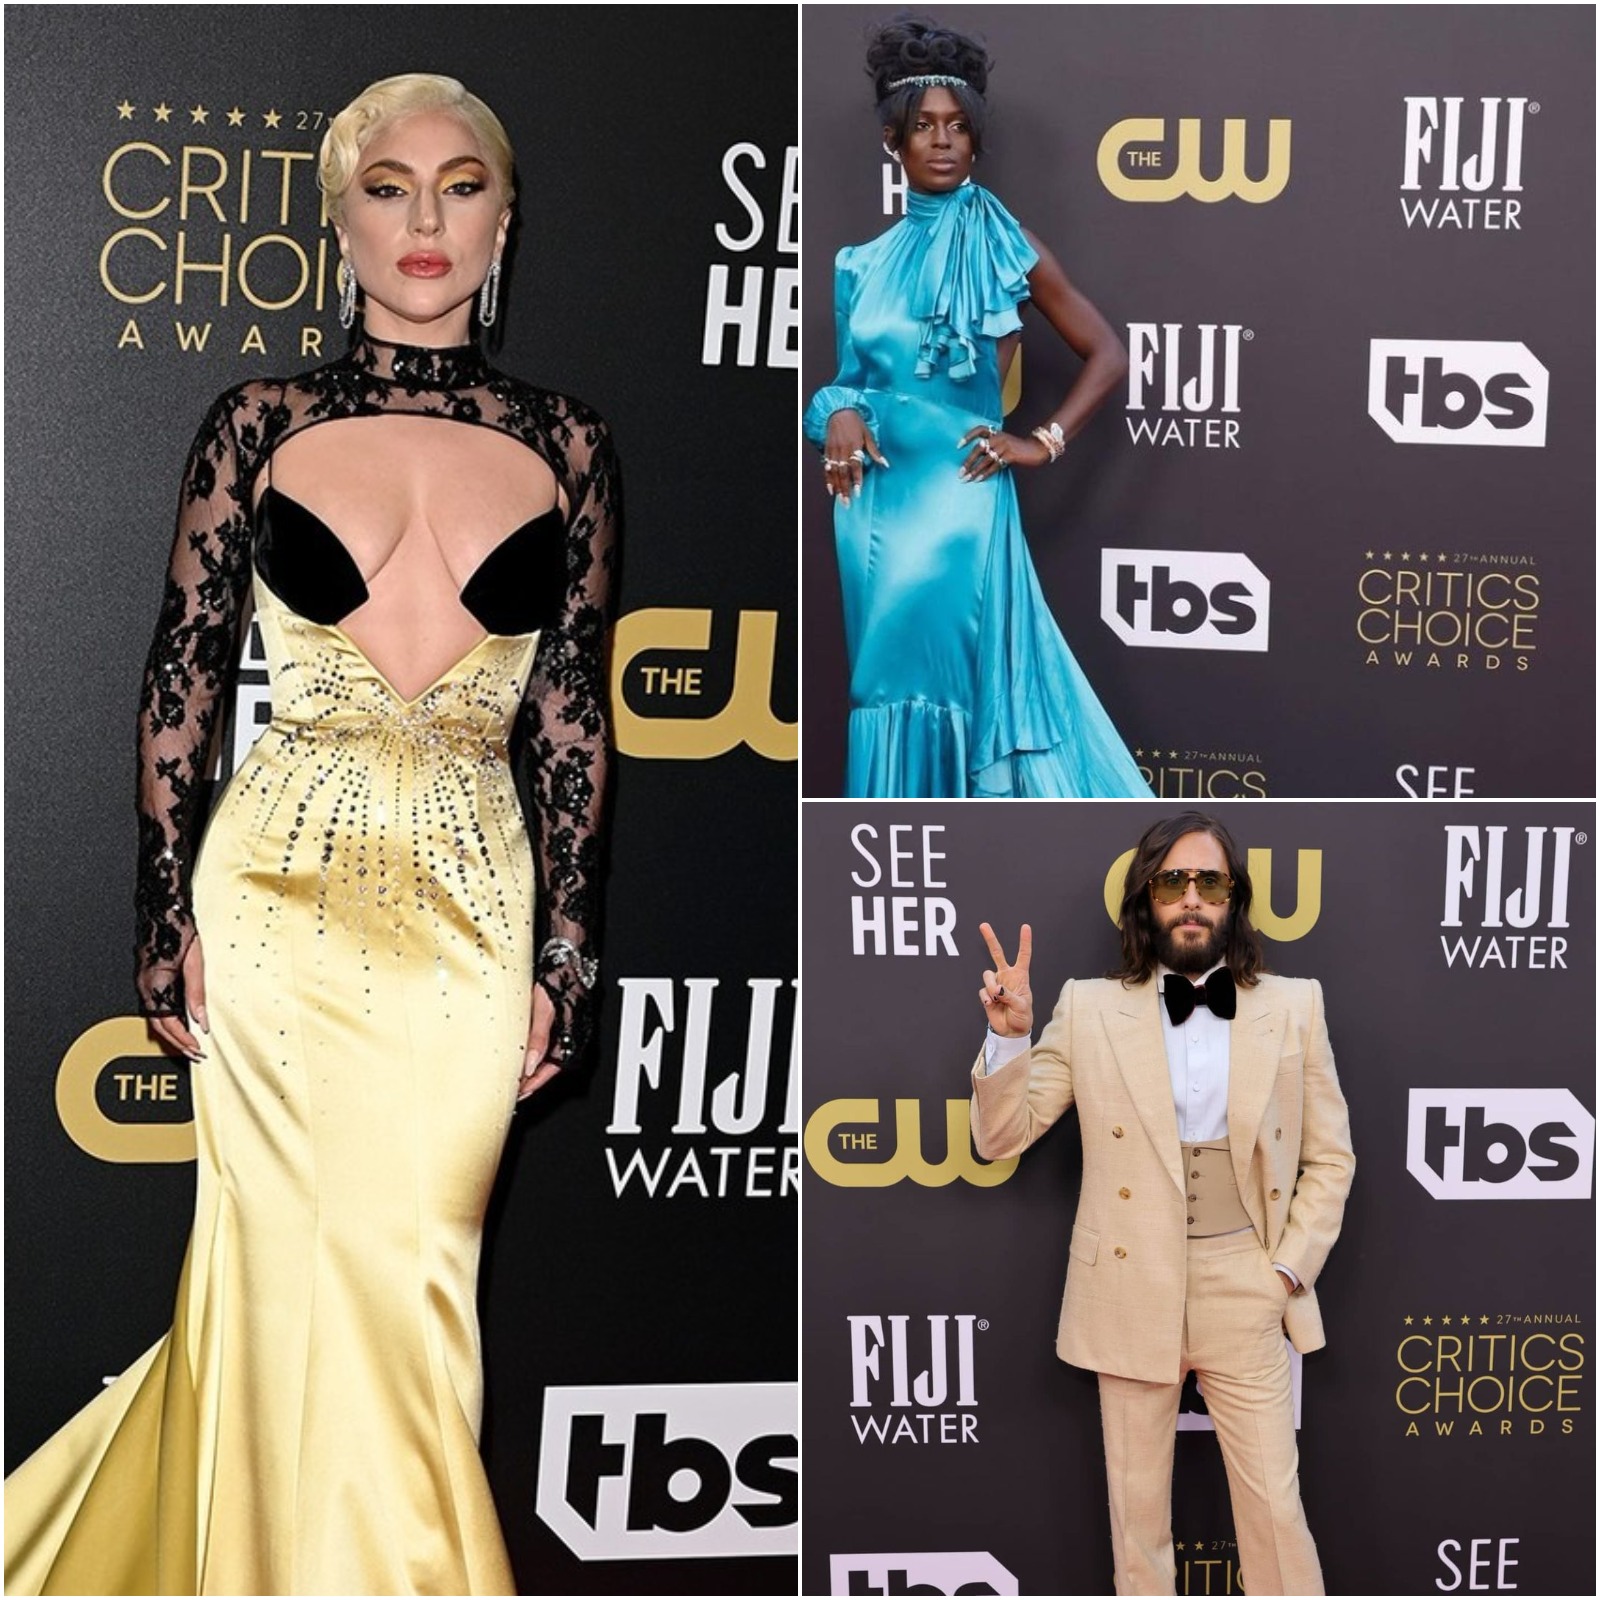 From Lady Gaga in Gucci to Selena Gomez in custom Louis Vuitton